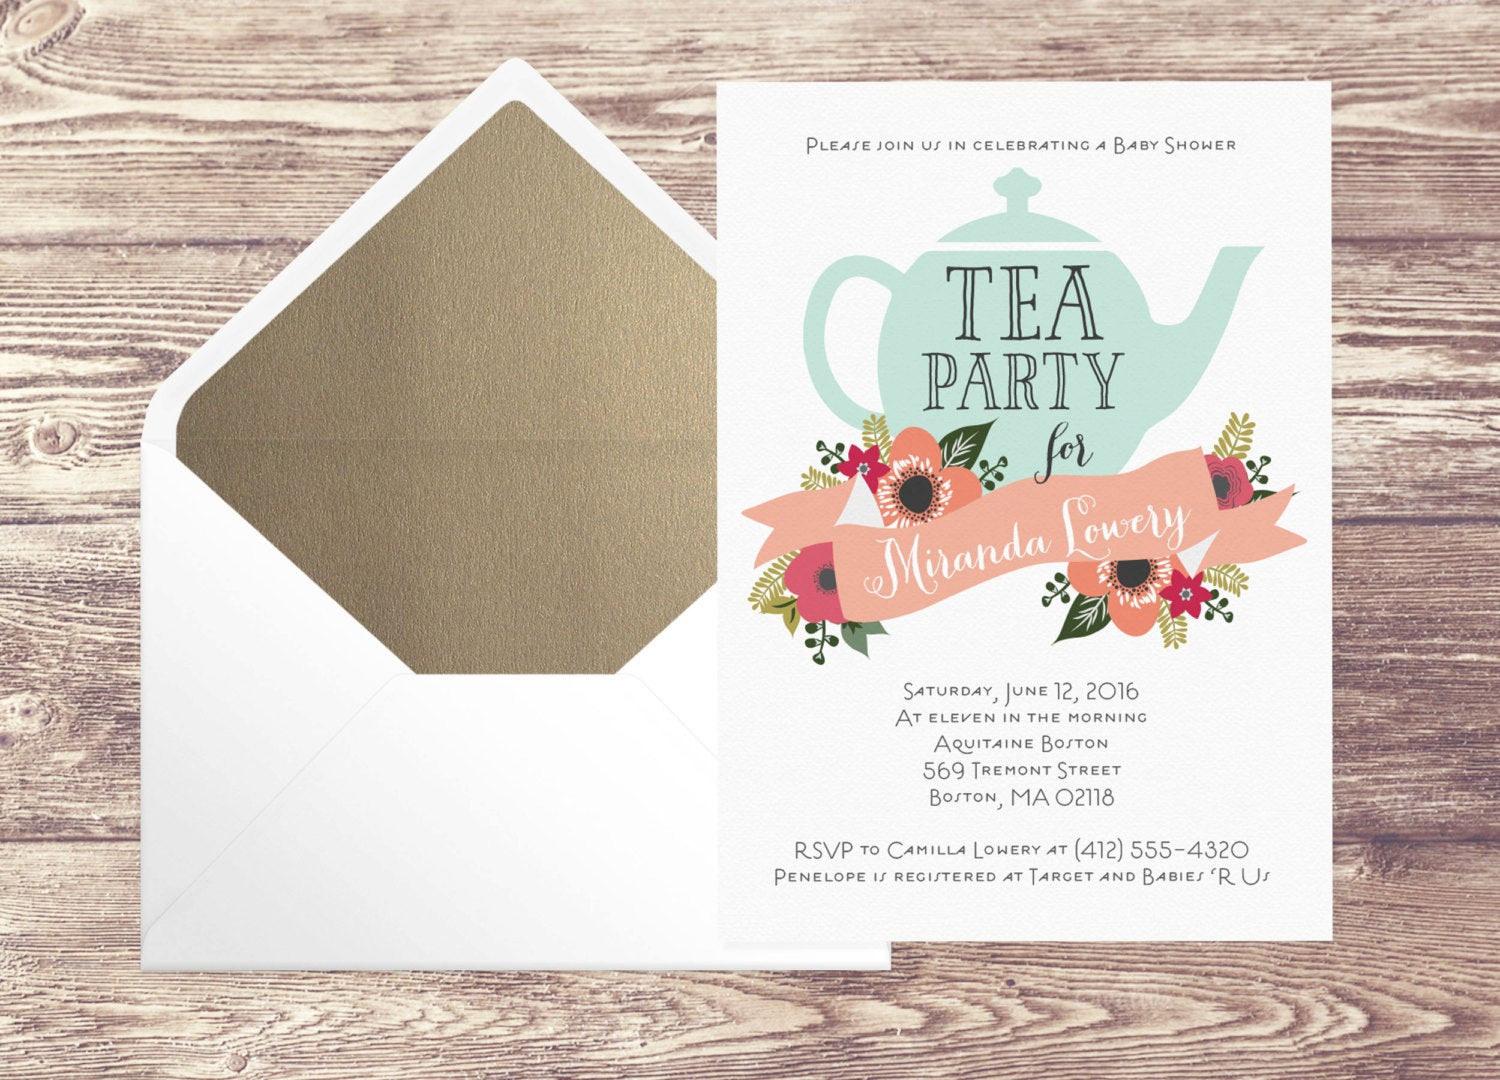 Baby Shower Invitations Tea Party
 Printed Baby Shower Tea Party Invitation with Gold Envelope